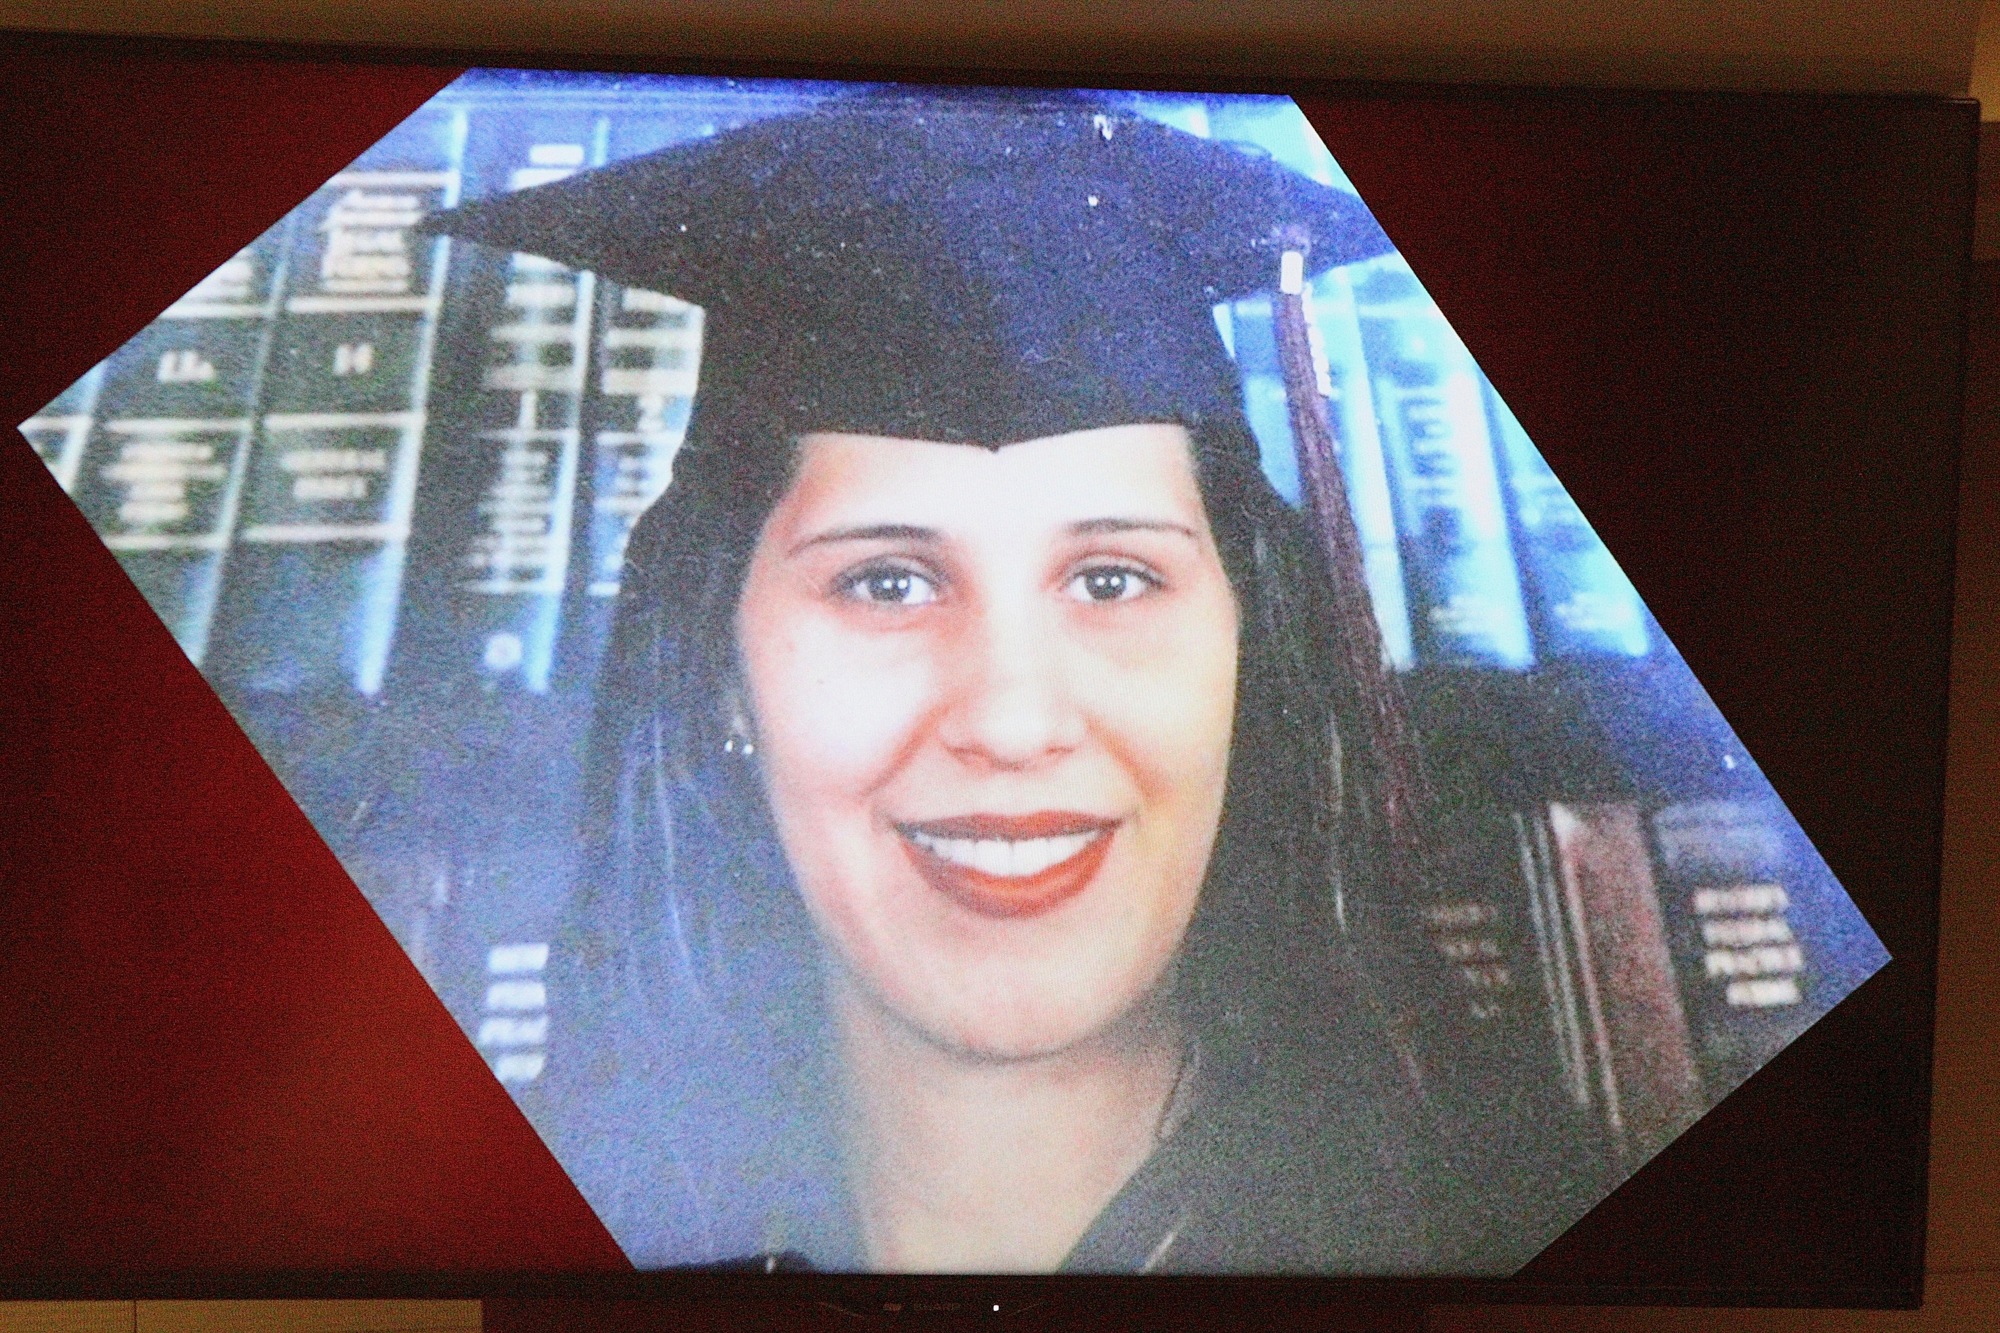 Zuheily Rosado, the victim, as seen in a photo displayed in court by the prosecution on the final day of the trial.